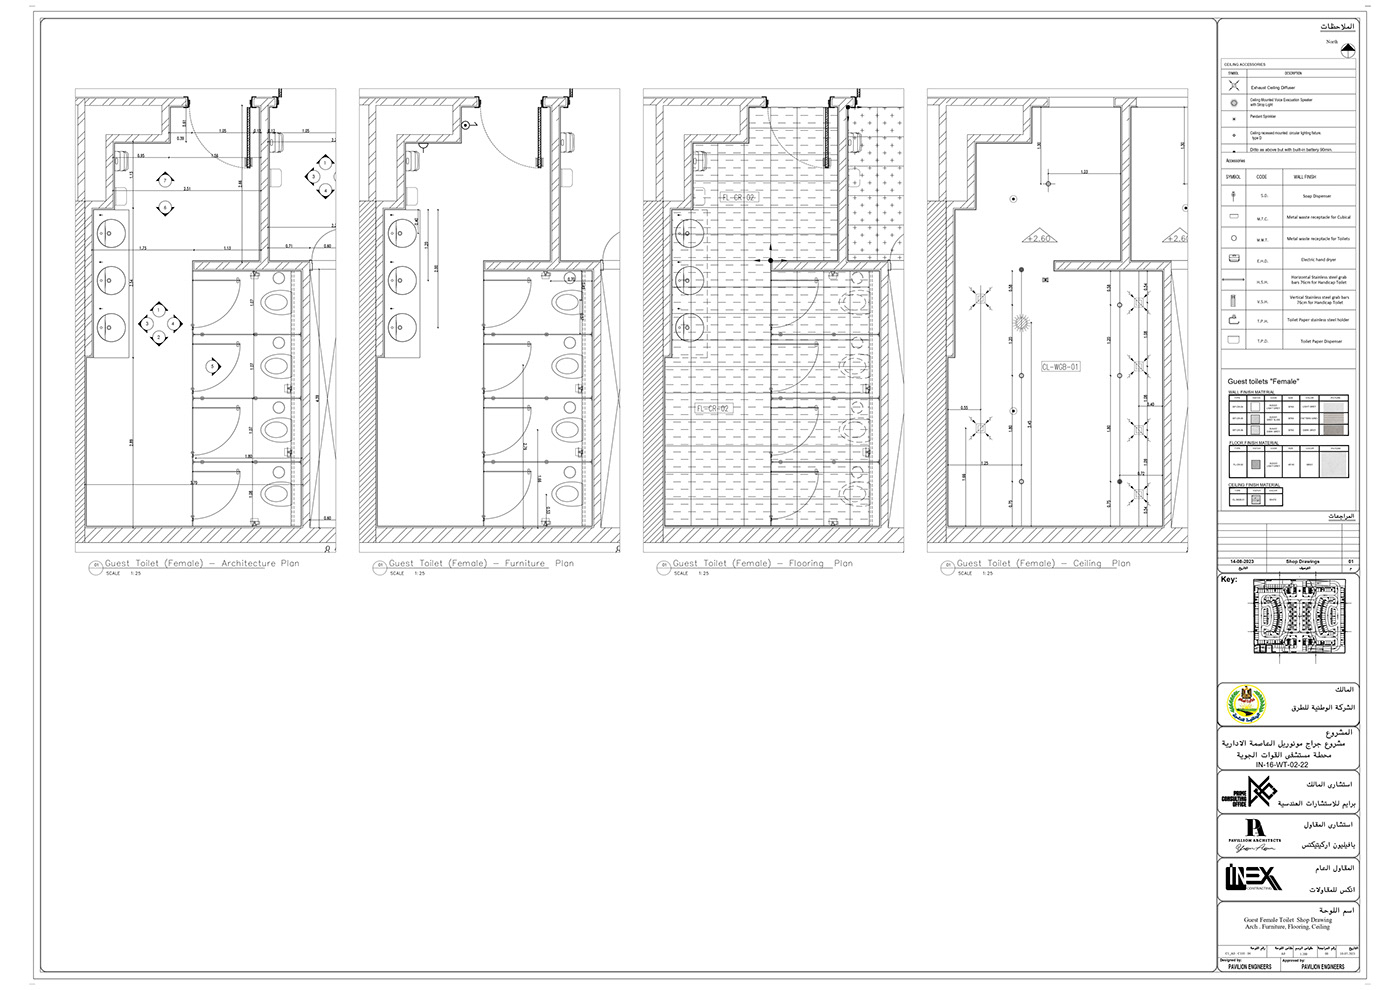 shop drawing working drawings AutoCAD revit architecture exterior interior design 